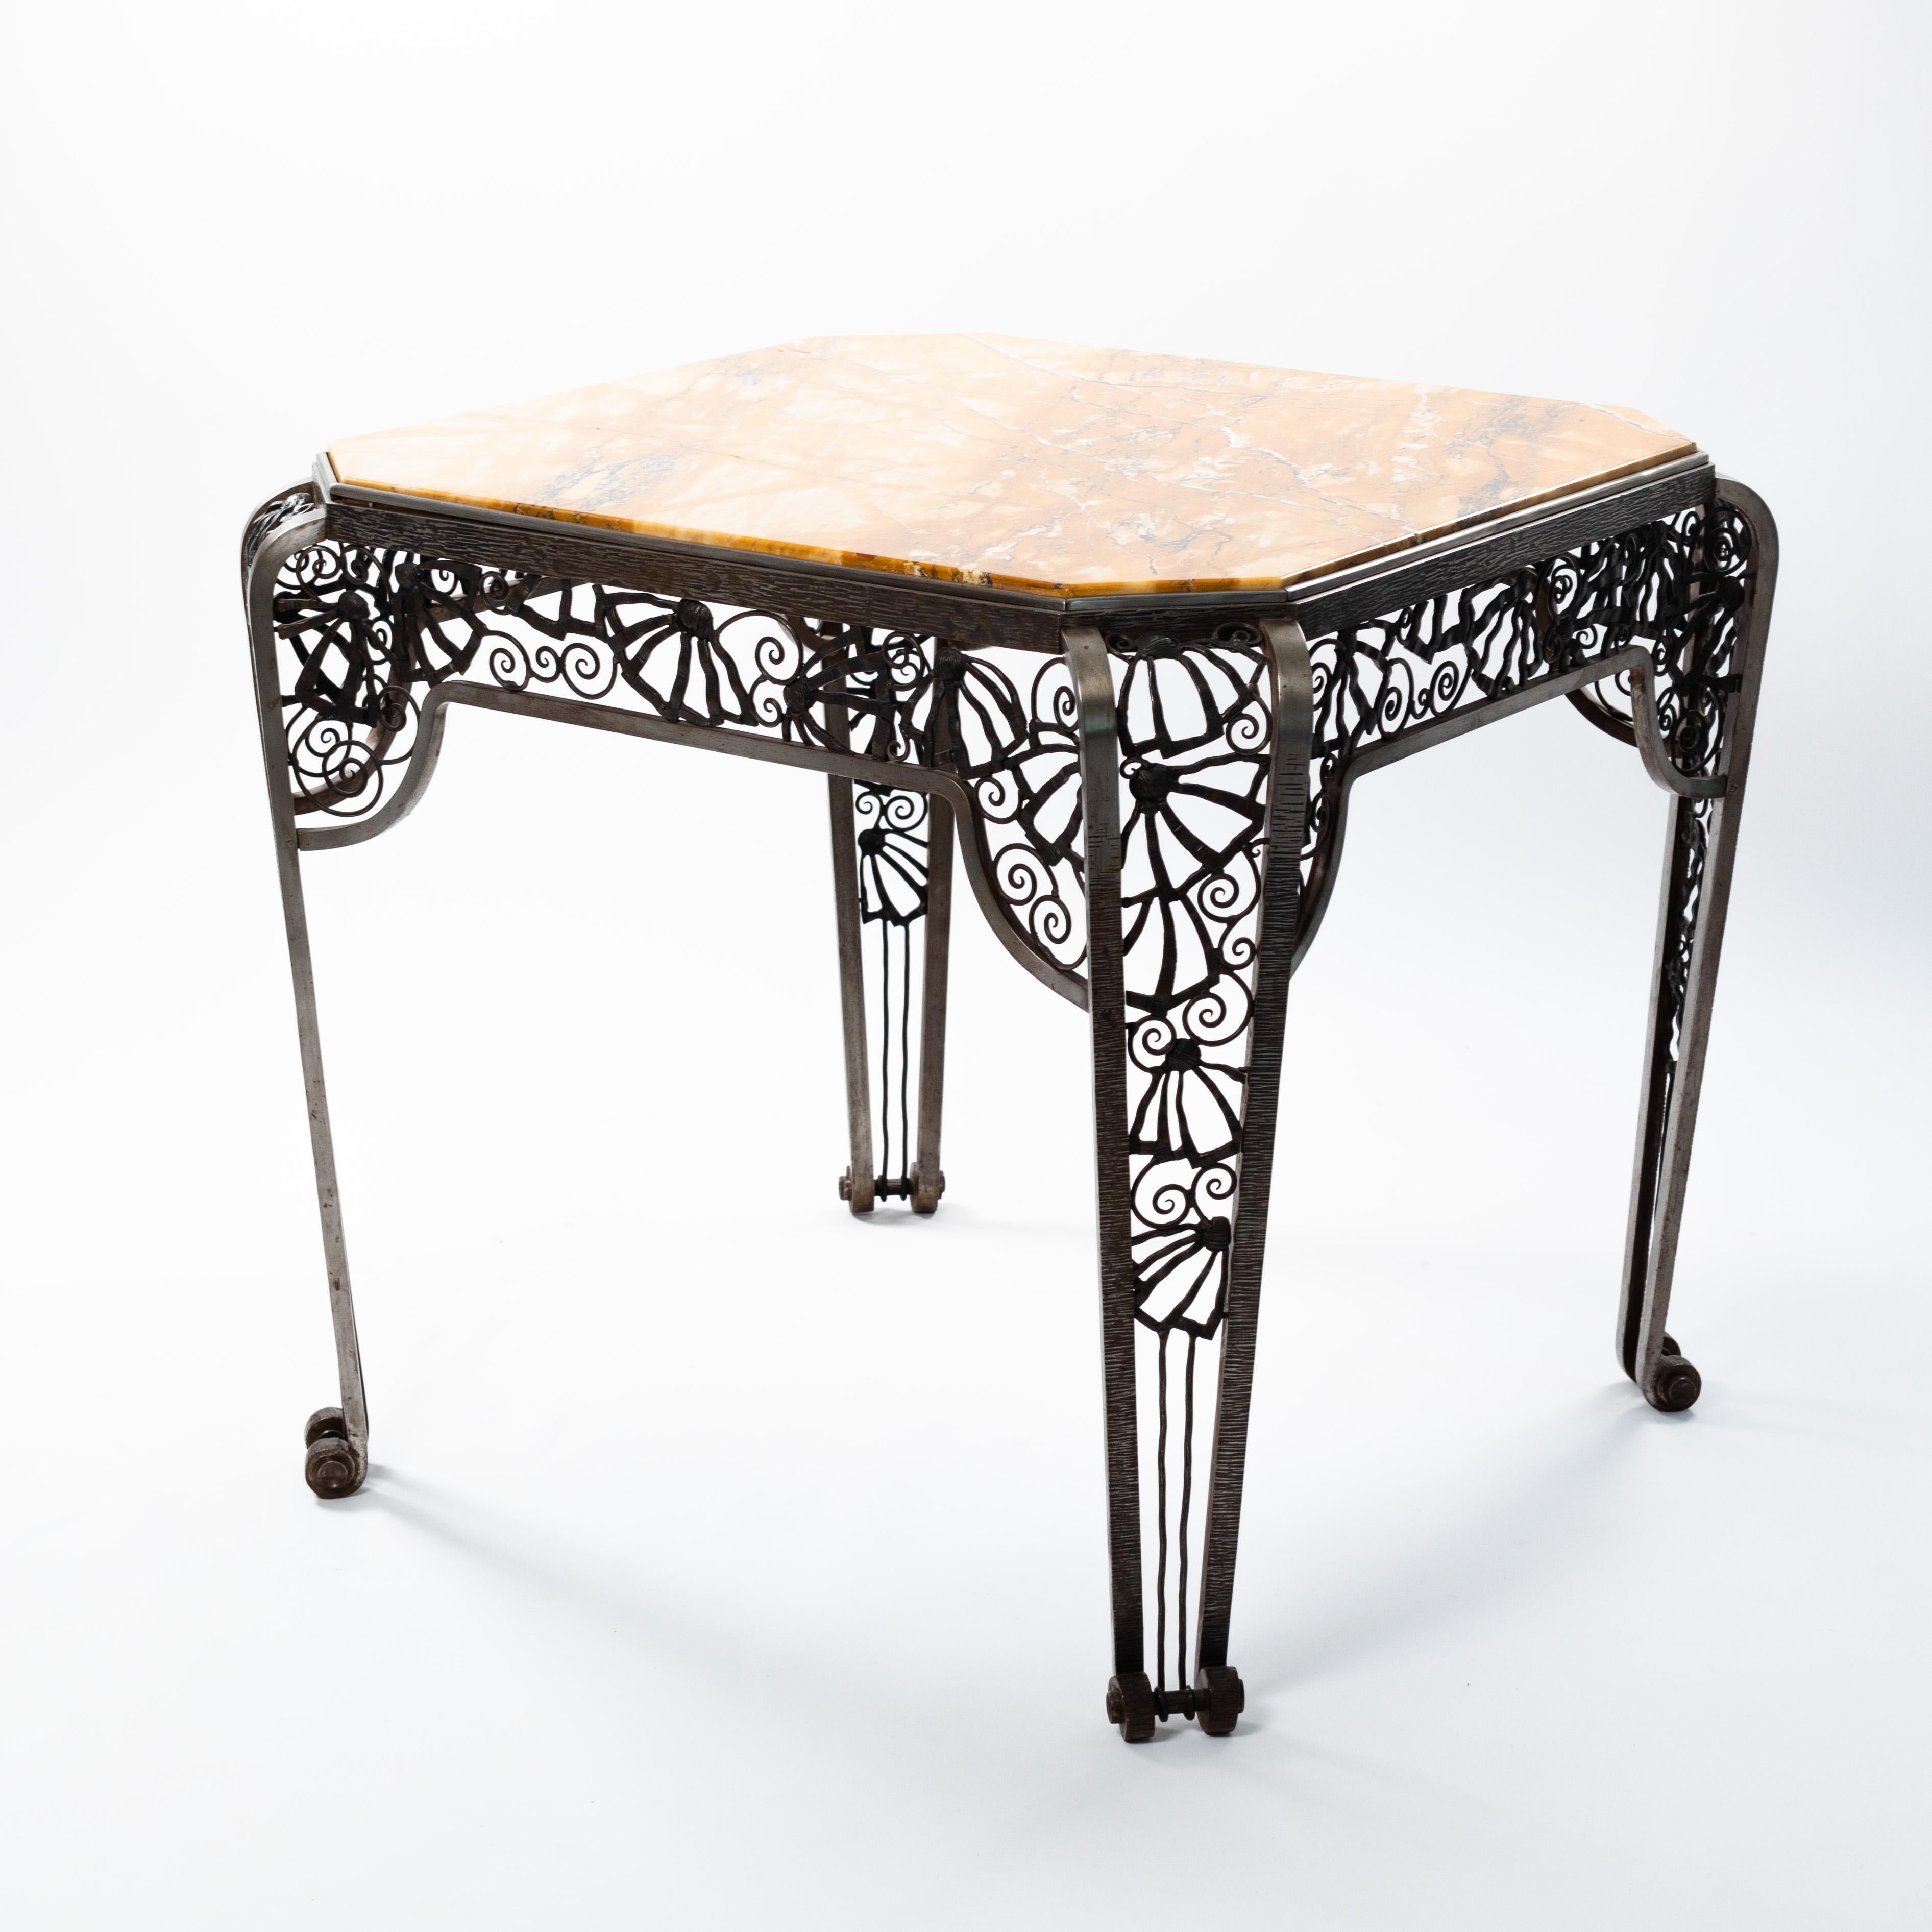 French Art Deco center table in forged iron with mustard colored marble top.

This exceptional table by Malatre et Tonnelier is a handcrafted work of art and an absolute eye-catcher.
The table is octagonal and the 4 curved legs end in a volute at